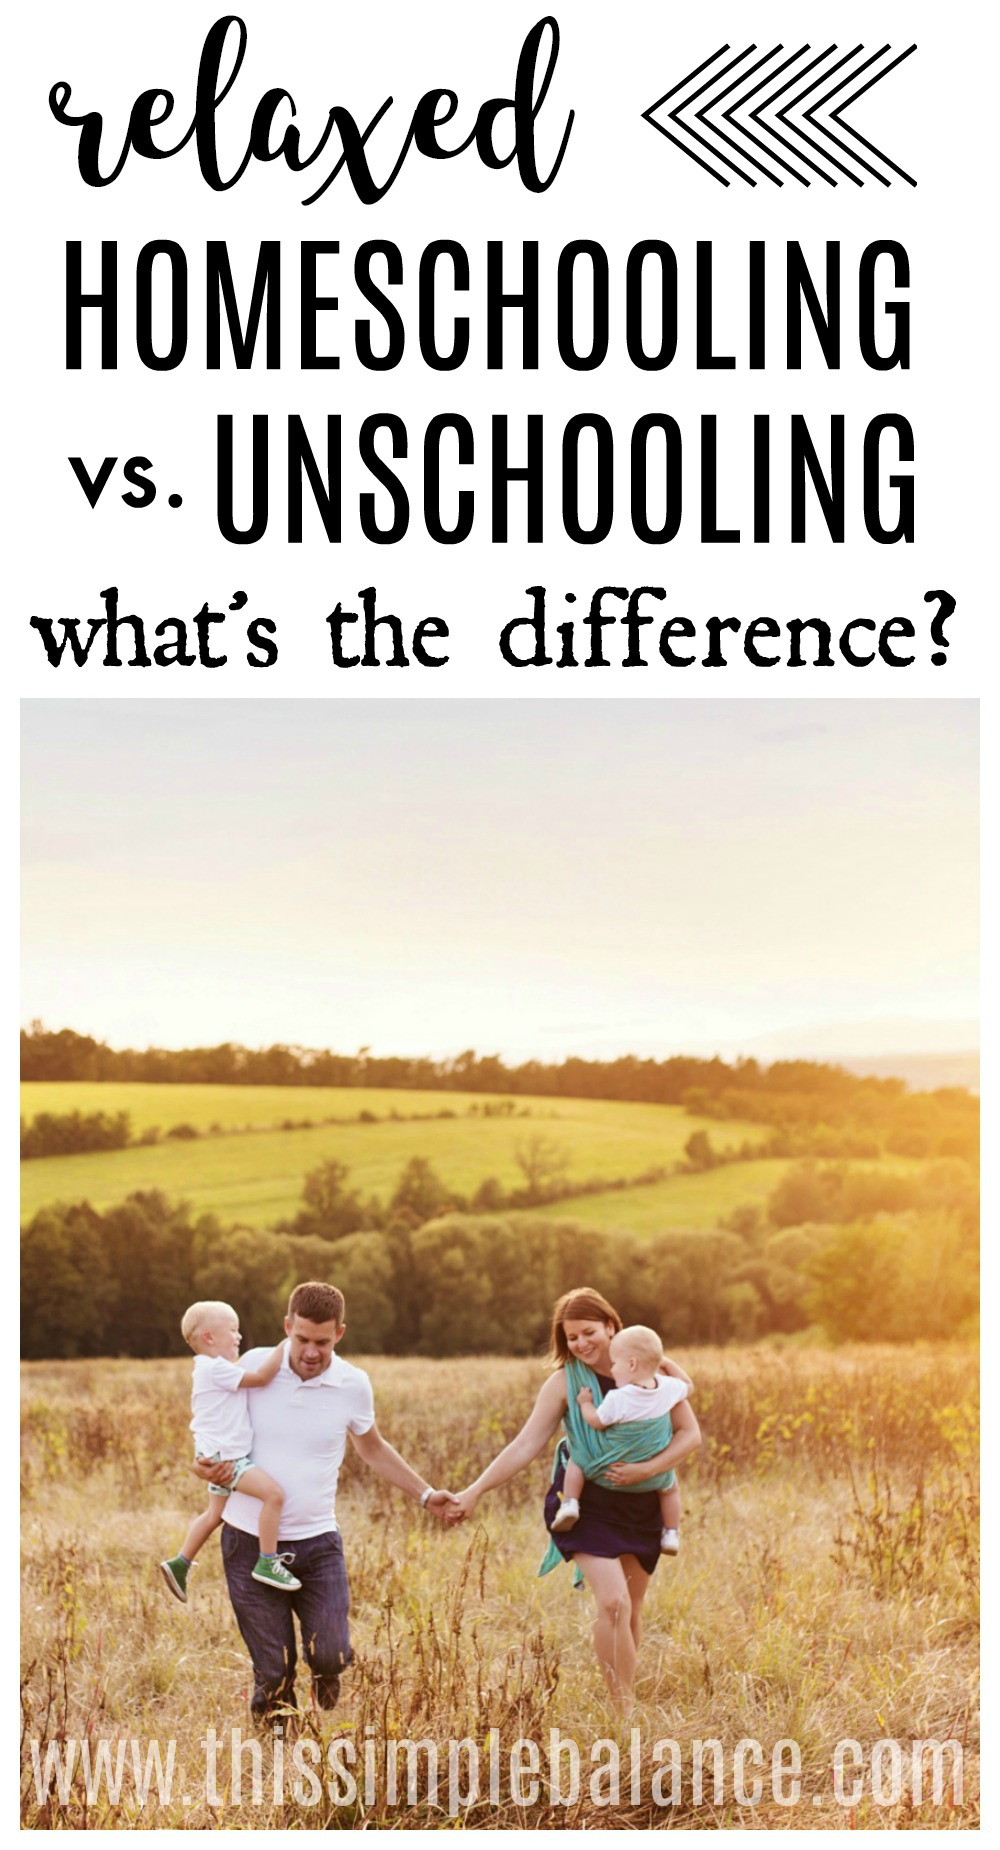 parents with two small children walking in open field, with text overlay "relaxed homeschooling vs. unschooling what's the difference?"